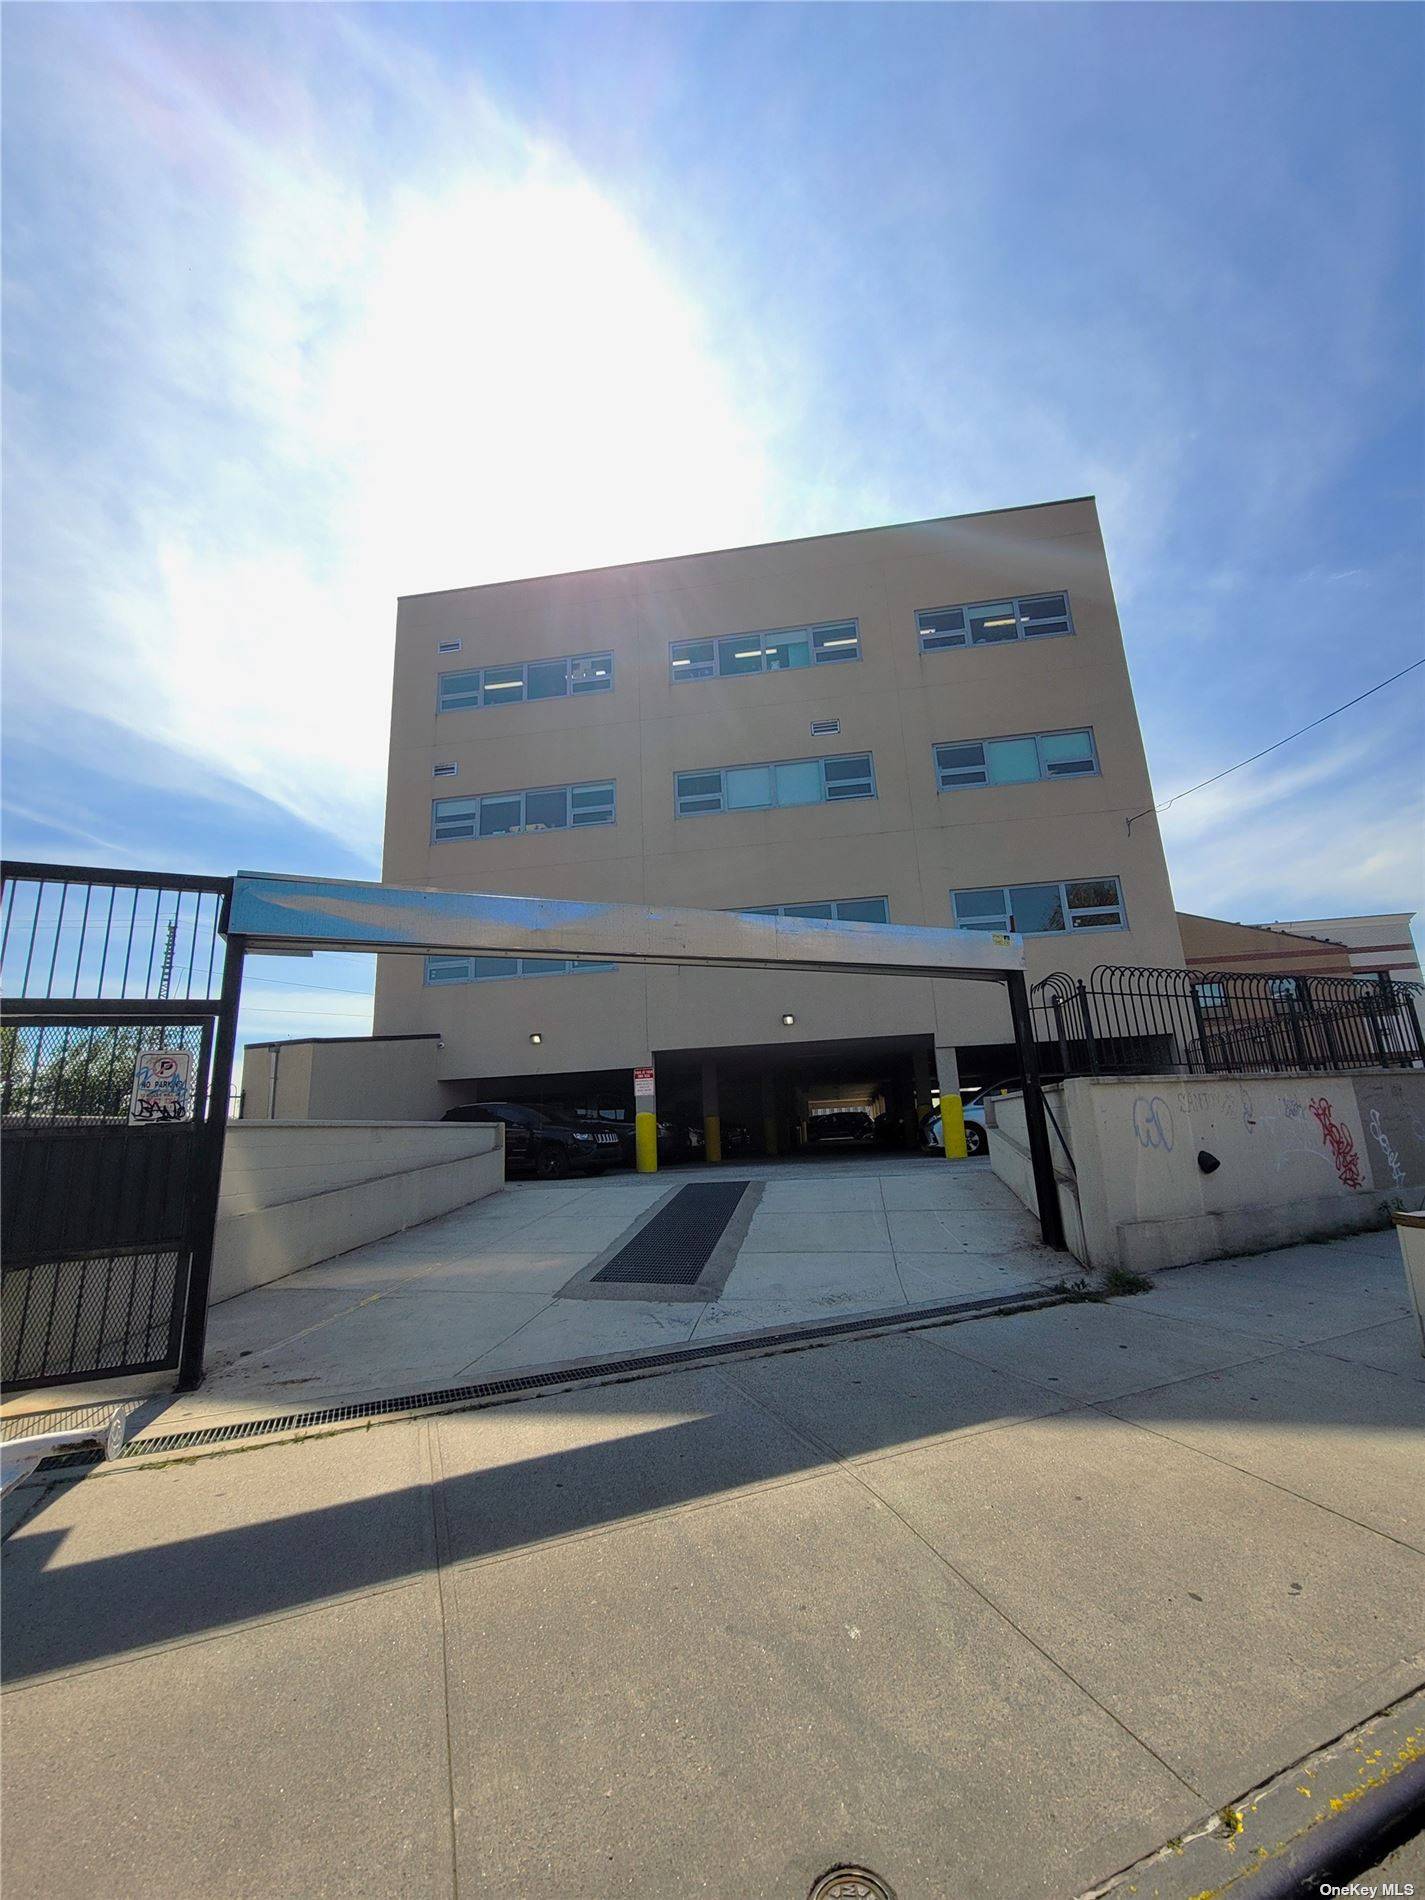 PRIME OFFICE SPACE AVAILABLE FOR LEASE ADDRESS 76 09 QUEENS BLVD ELMHURST, NY 11373 ALSO KNOWN AS 76 07 47 TH AVE ELMHURST, NY 11373 IDEAL USES Office Medical Wellness ...